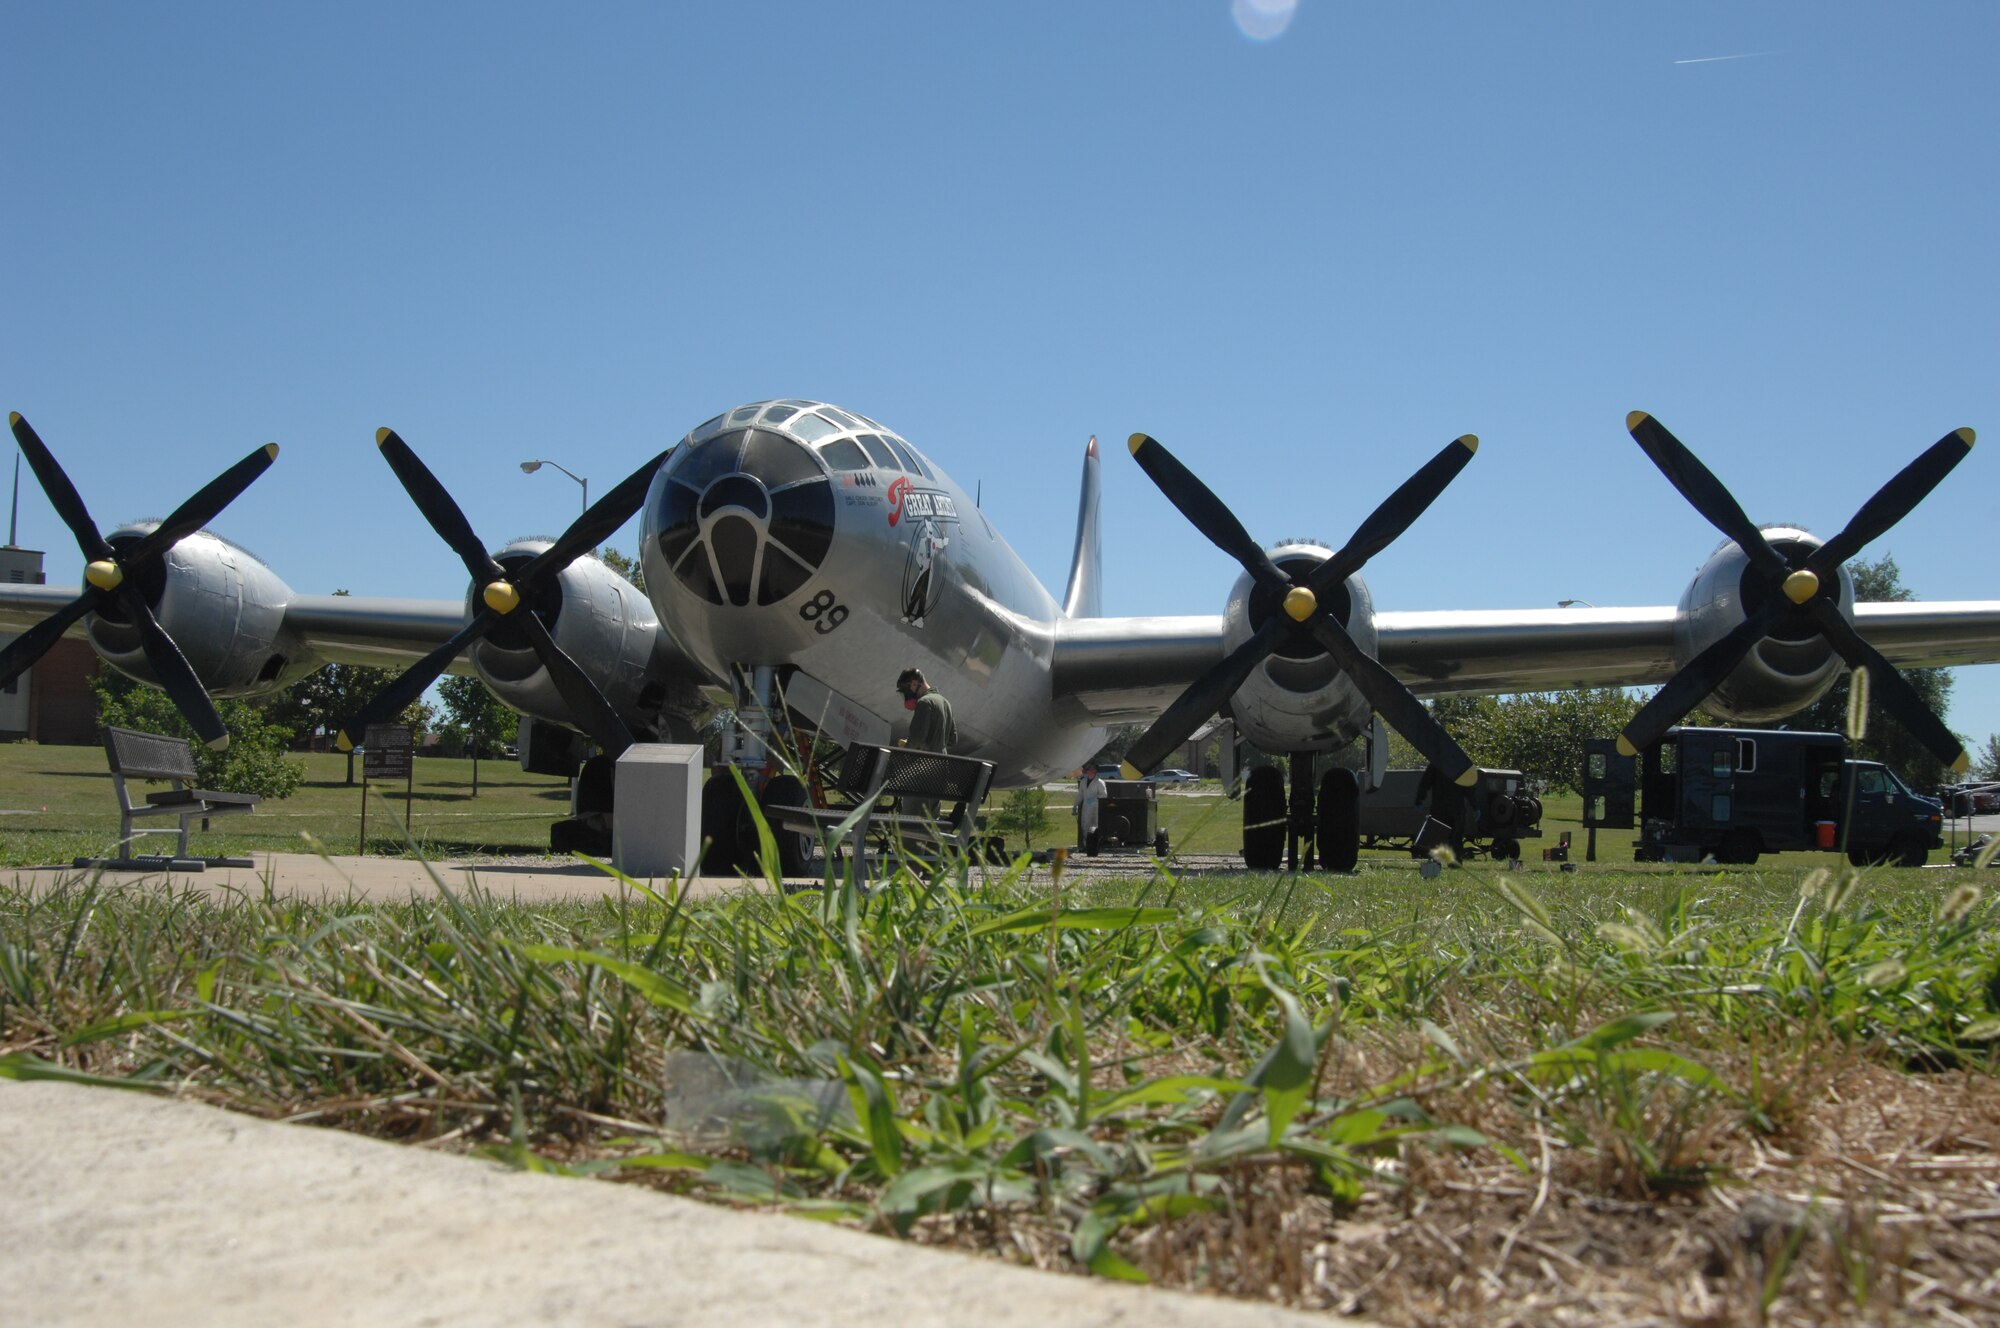 WHITEMAN AIR FORCE BASE, Mo. --  Refurbishments to the B-29 static display at the Spirit Gate are scheduled to be complete Oct. 2. Painting scheduled for Sept. 22-23 will force the closure of the Spirit Gate from 8 a.m. to 8 p.m both days. The B-29 Superfortress, the most advanced bomber to see operational service in World War II, was used in the conventional and low-level night incendiary attacks against Japan. The aircraft was also the world’s first nuclear delivery vehicle with B-29’s from the 509th Composite Group dropping bombs on Hiroshima and Nagasaki. The original “Great Artiste” which this display aircraft commemorates, was the only aircraft to fly on both atomic bomb missions and was later lost during a crash landing at Goose Air Base, Labrador Canada in 1949. During the atomic bomb missions, it was loaded with scientific equipment designed to measure the effects of the atomic attacks. The B-29 on display is actually SB-29, Serial Number 44-61671, but painted and marked to depict B-29, Serial Number 44-27353, assigned to the 393d Bombardment Squadron of the 509th Composite Group in the Pacific Theater during 1945. (U.S. Air Force photo/Tech. Sgt. Samuel A. Park)